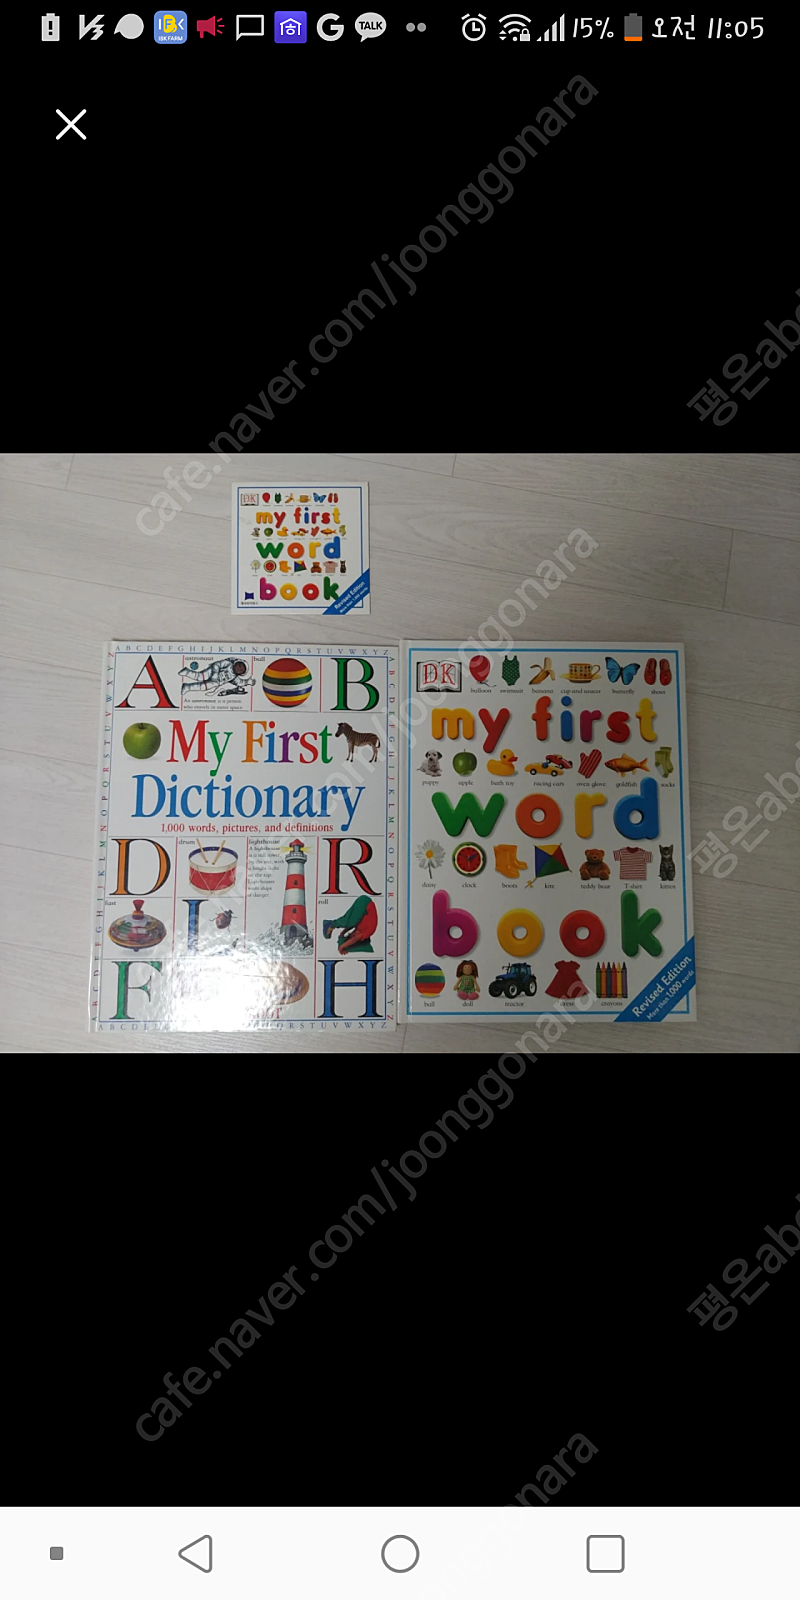 my first word book. dictionary